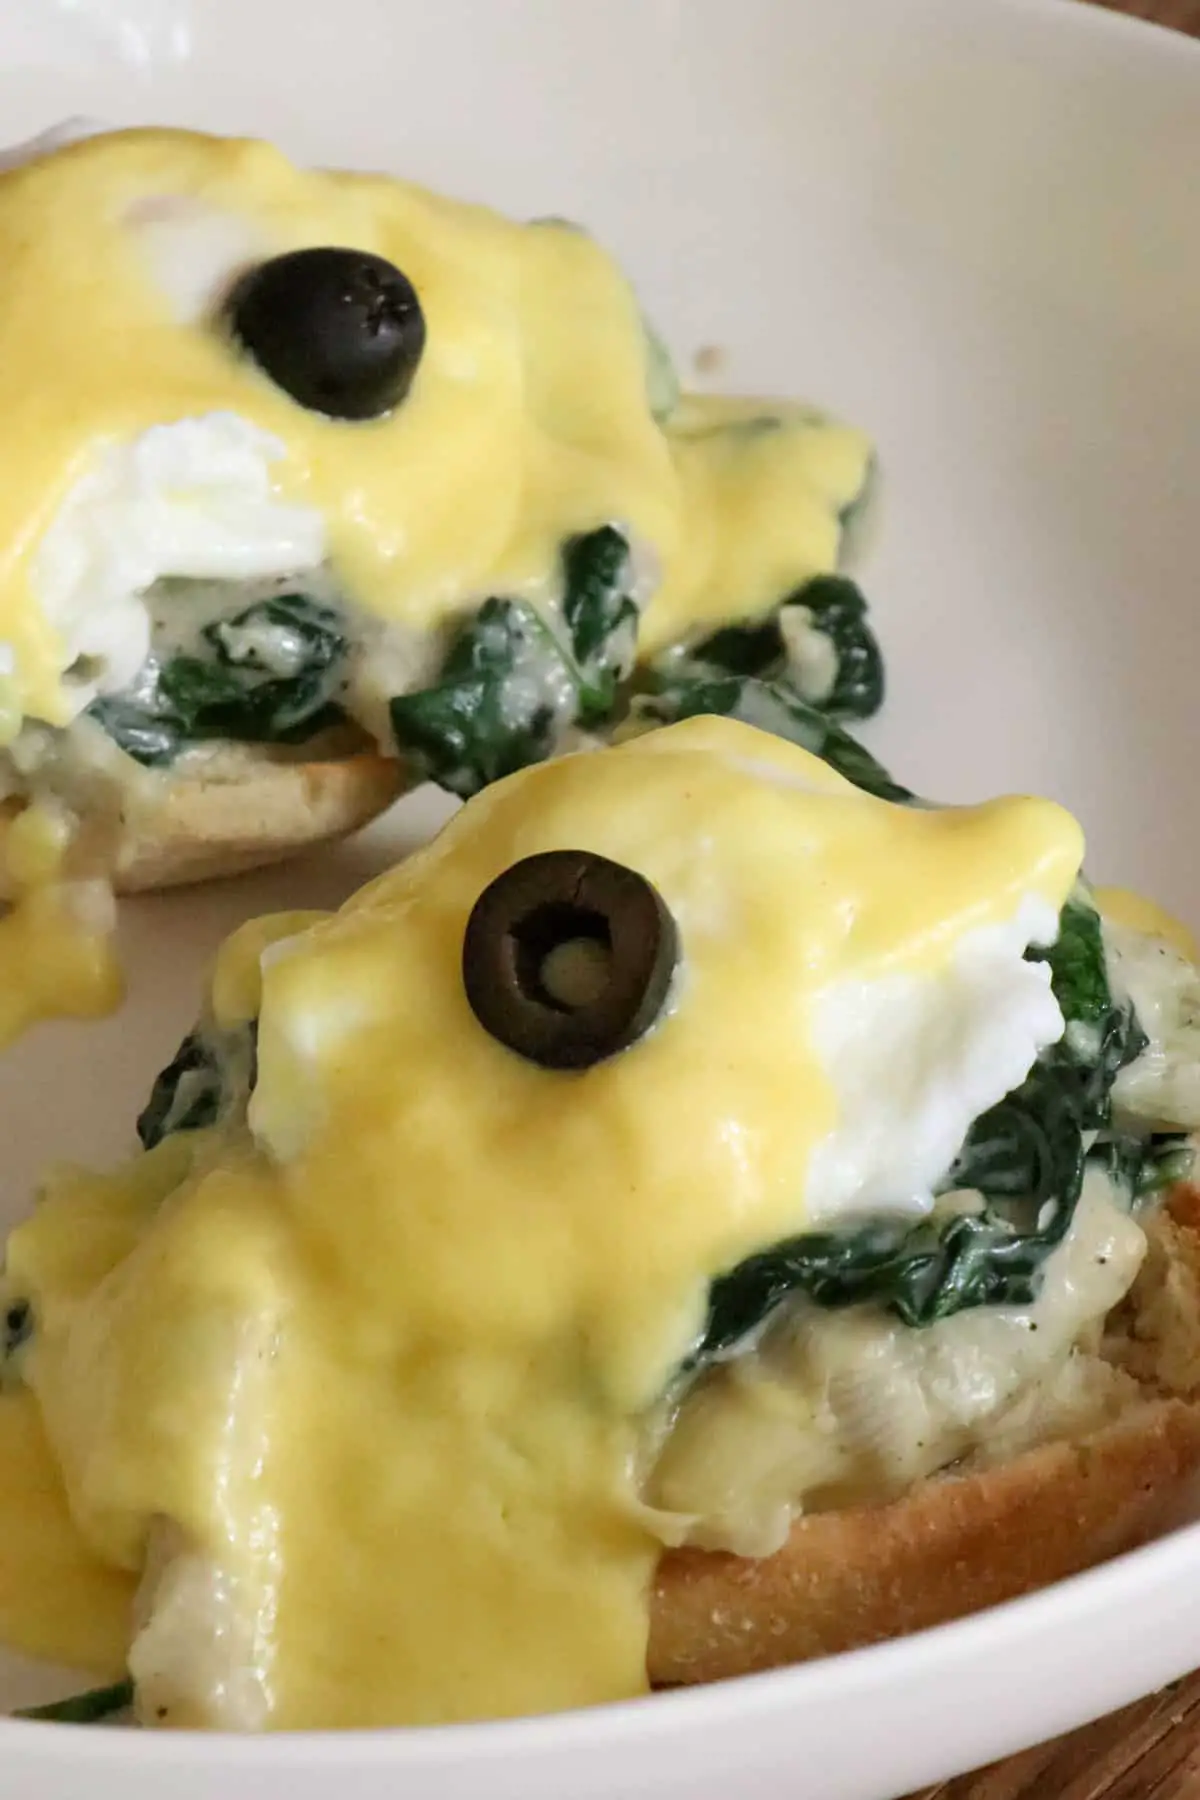 Poached eggs with hollandaise sauce and a black olive atop creamed spinach and artichokes and an English muffin on a white dish.